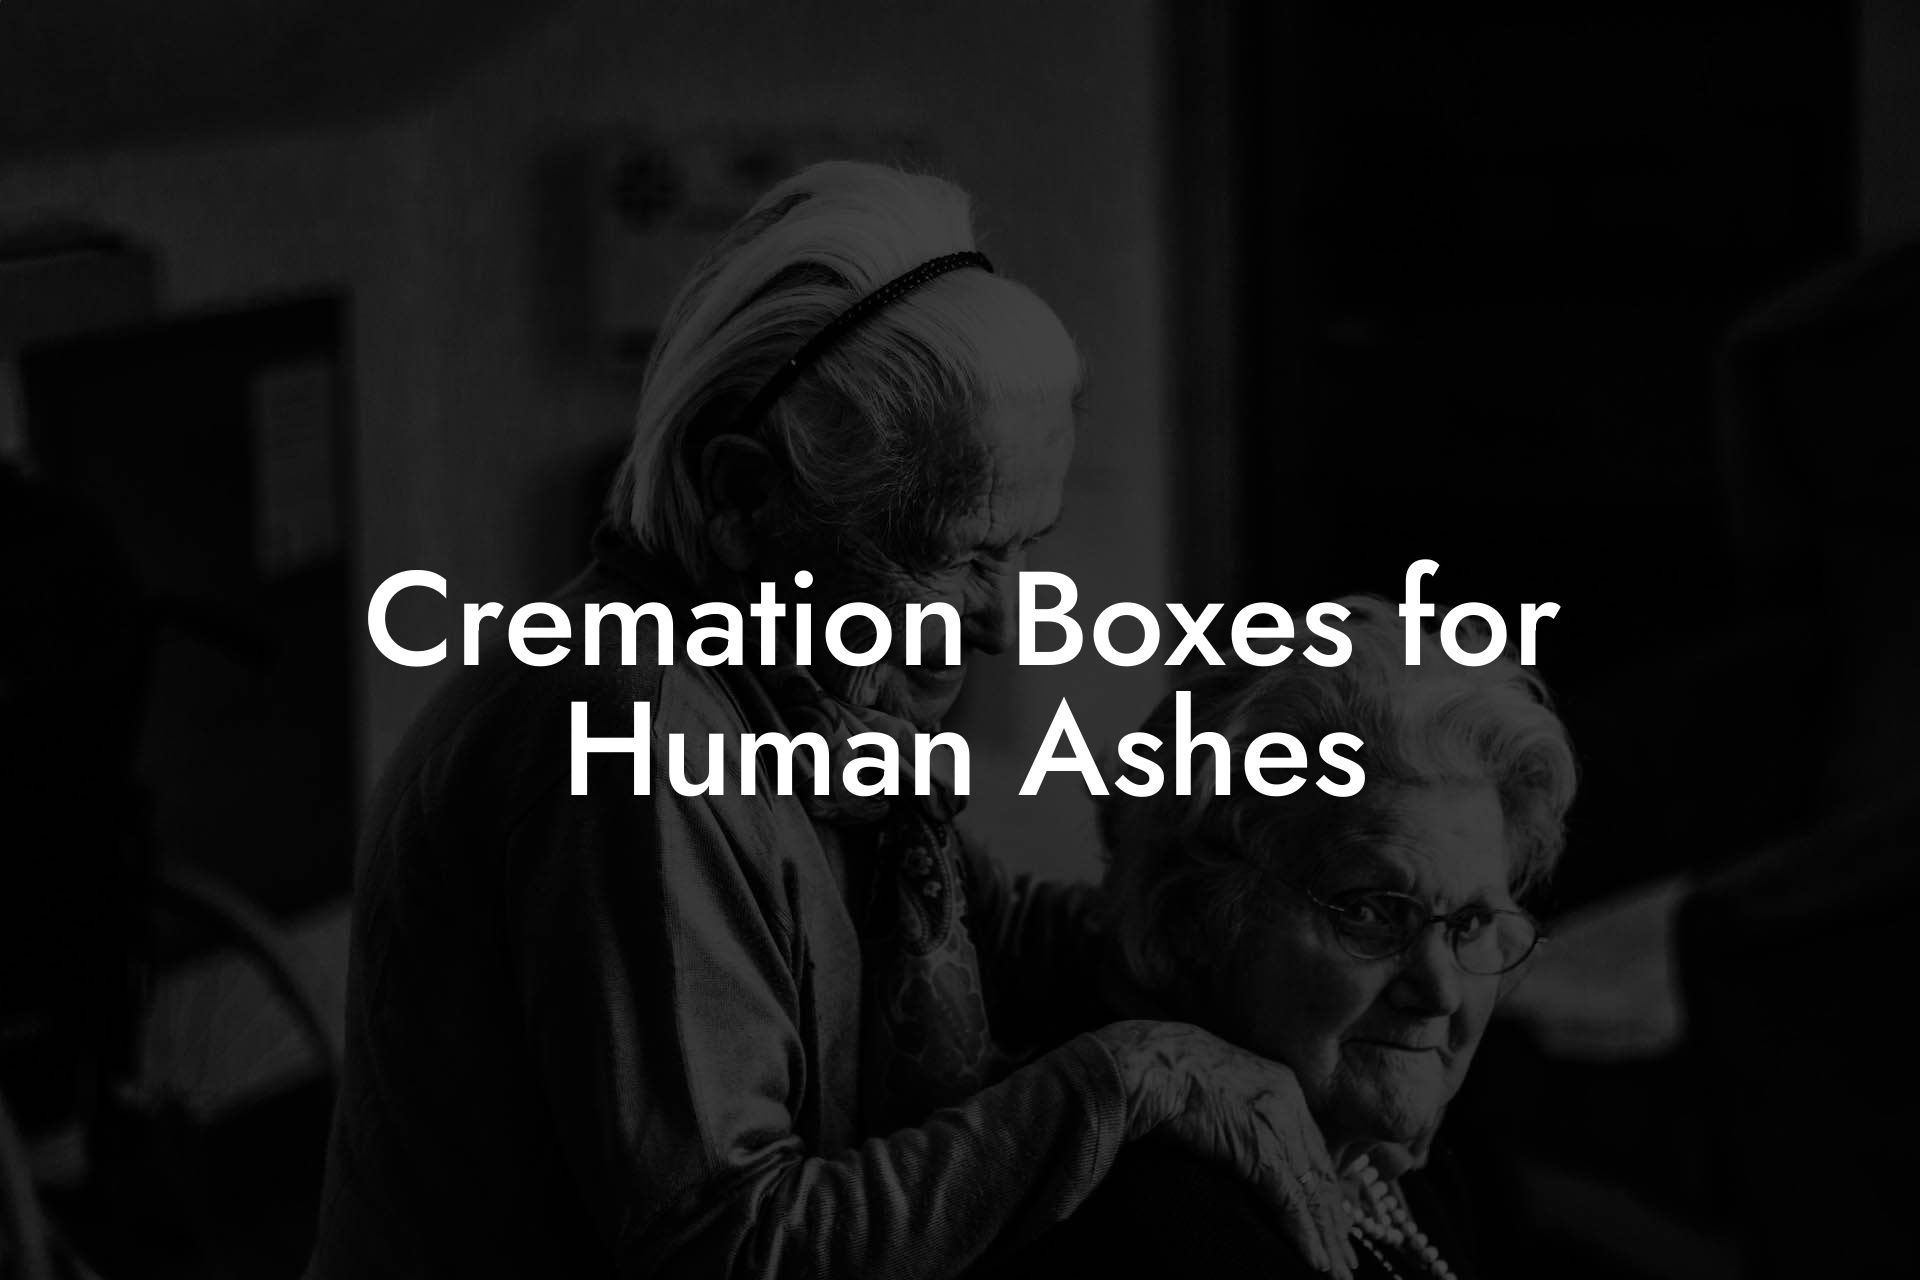 Cremation Boxes for Human Ashes